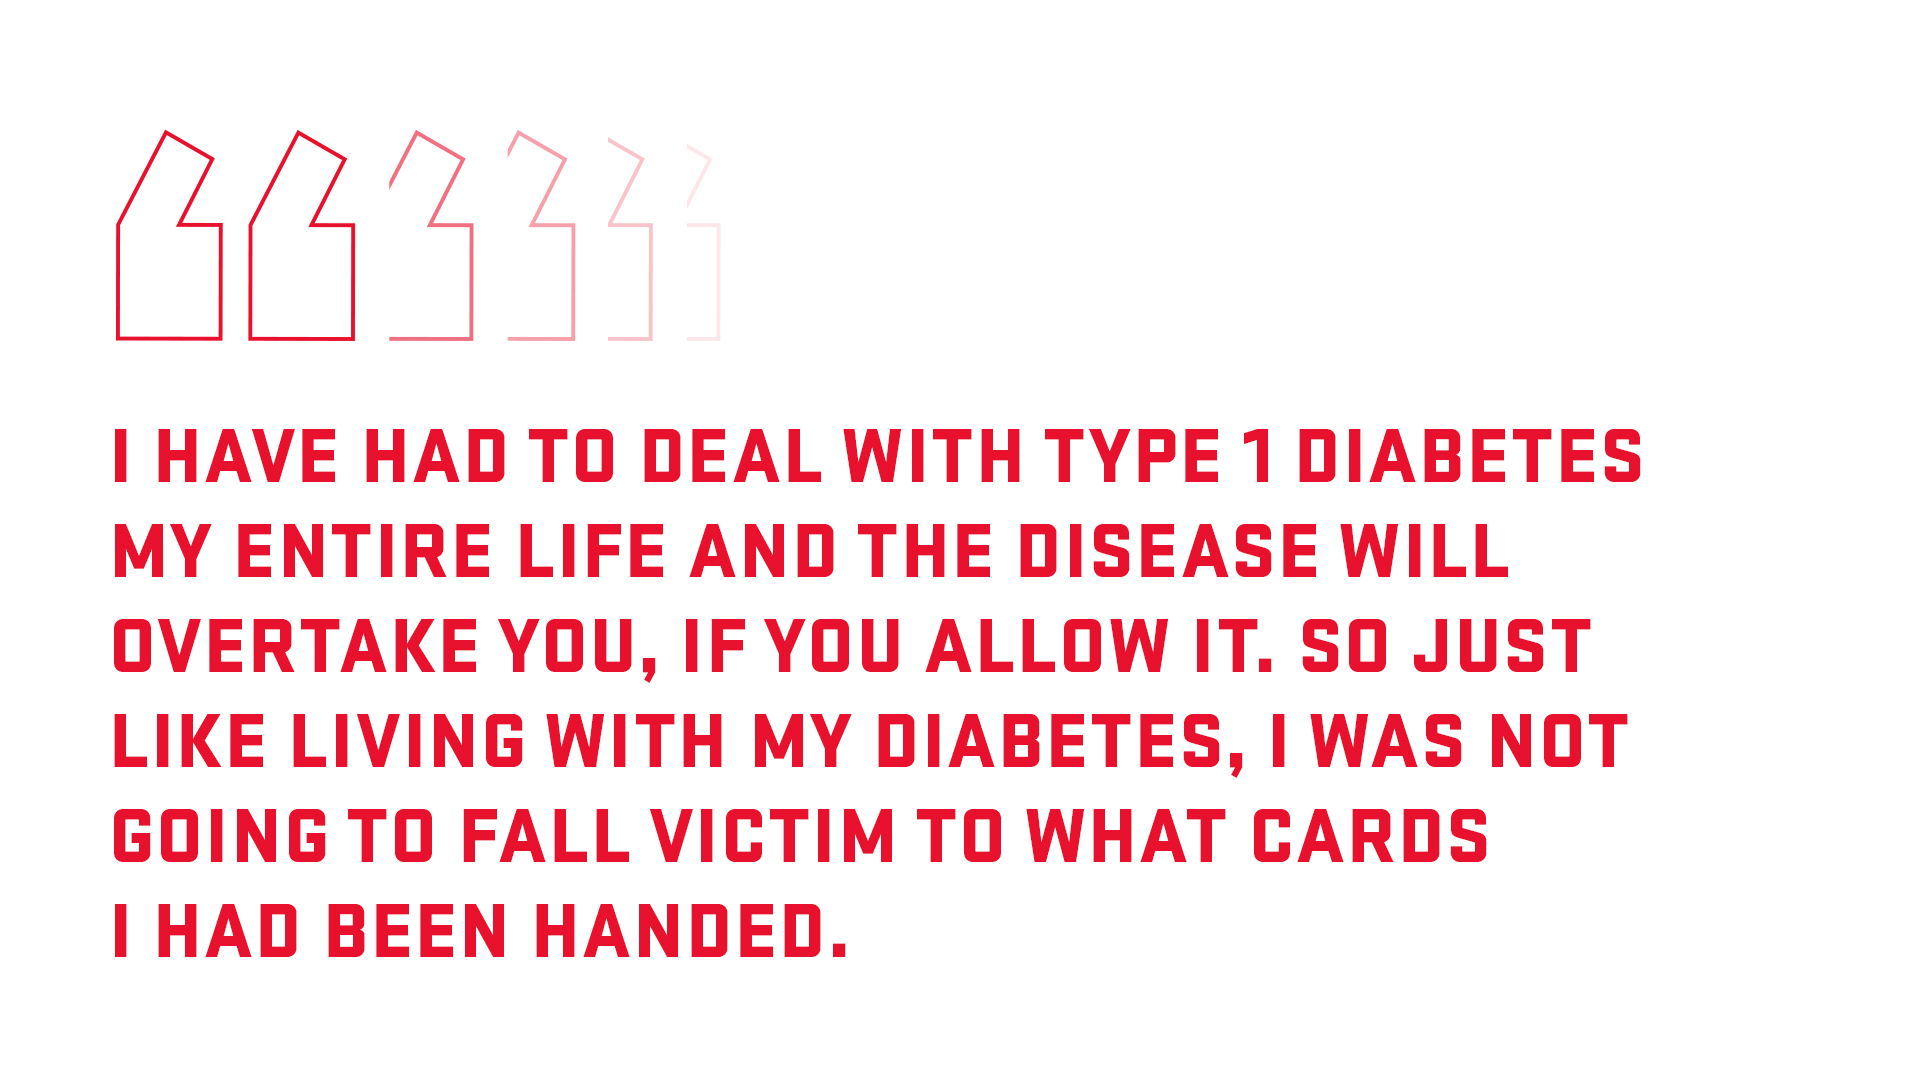 Pull quote: I have had to deal with Type 1 diabetes my entire life and the disease will overtake you if you allow it. So just like living with my diabetes, I was not going to fall victim to what cards I had been handed. 